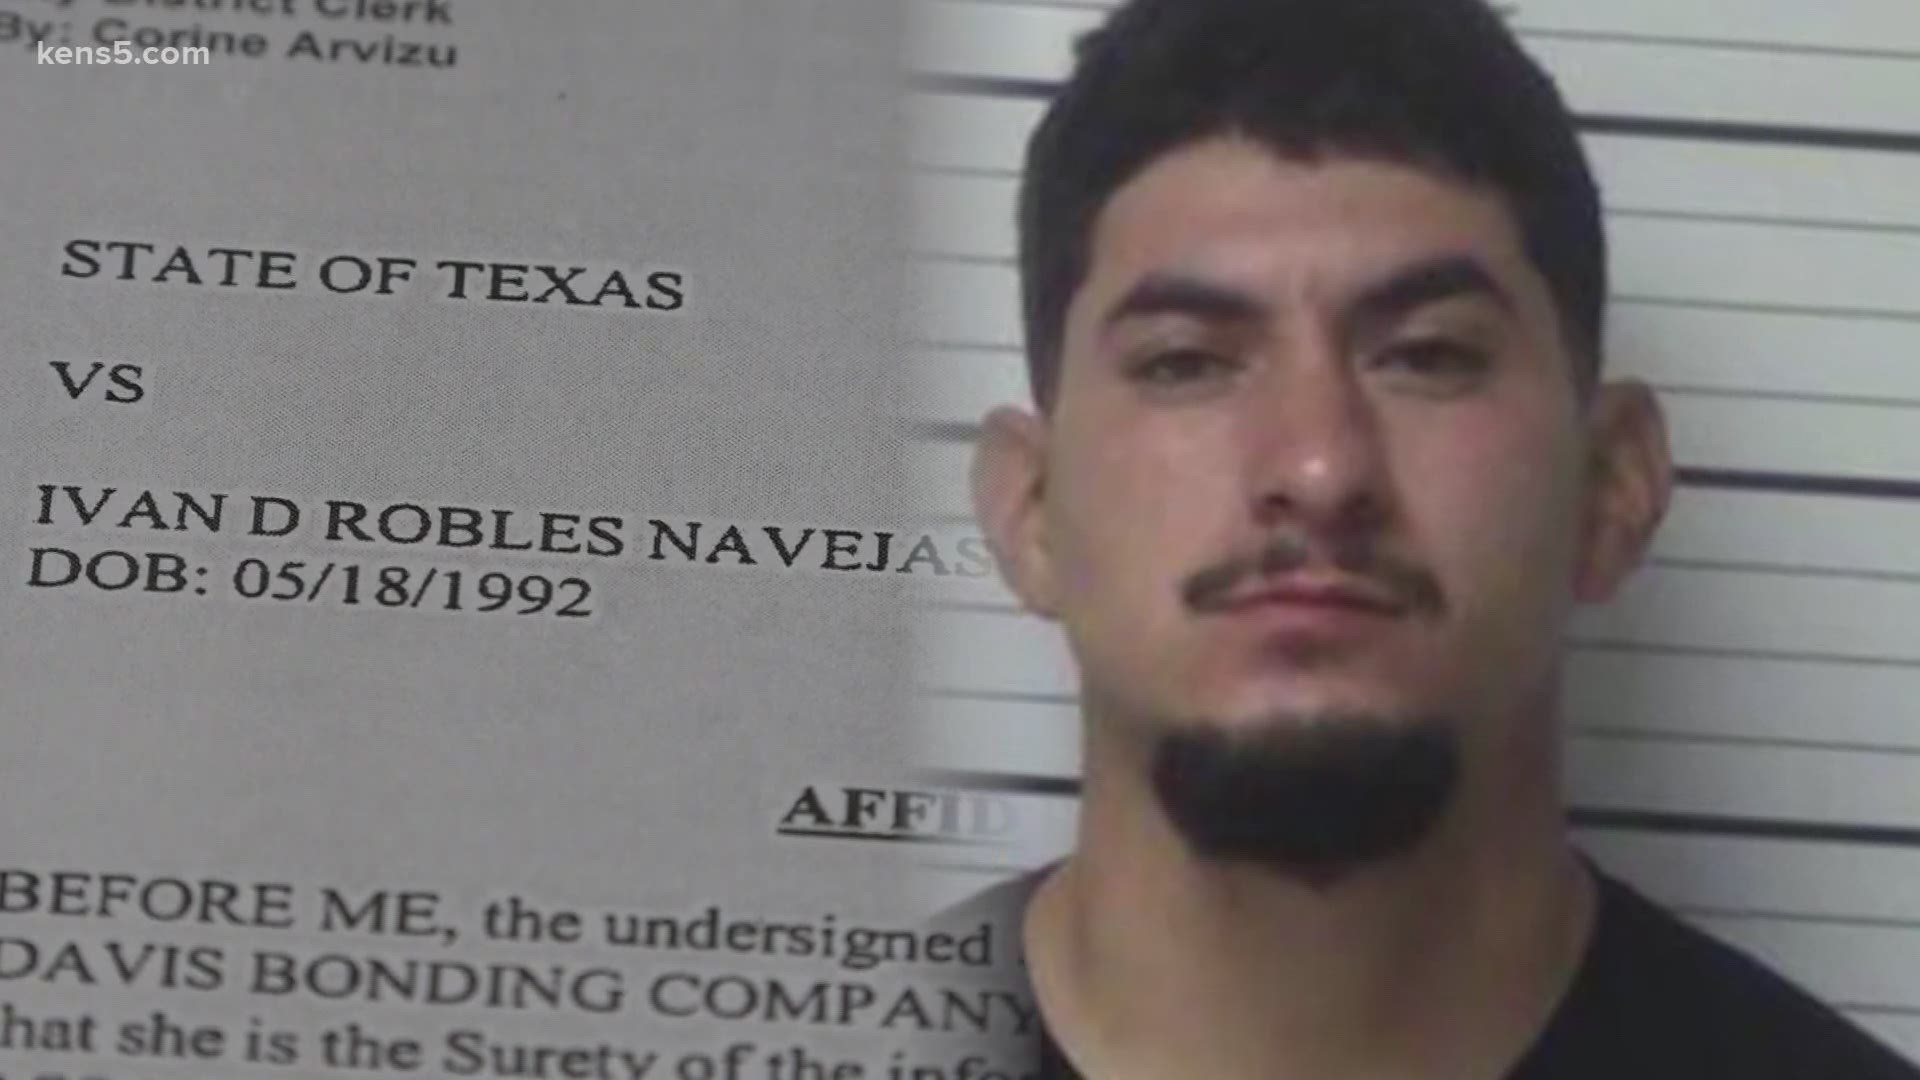 Ivan Robles Navejas was out on bond for a 2018 incident in which he's alleged to have hit someone with a truck and bit off part of his ear, records show.